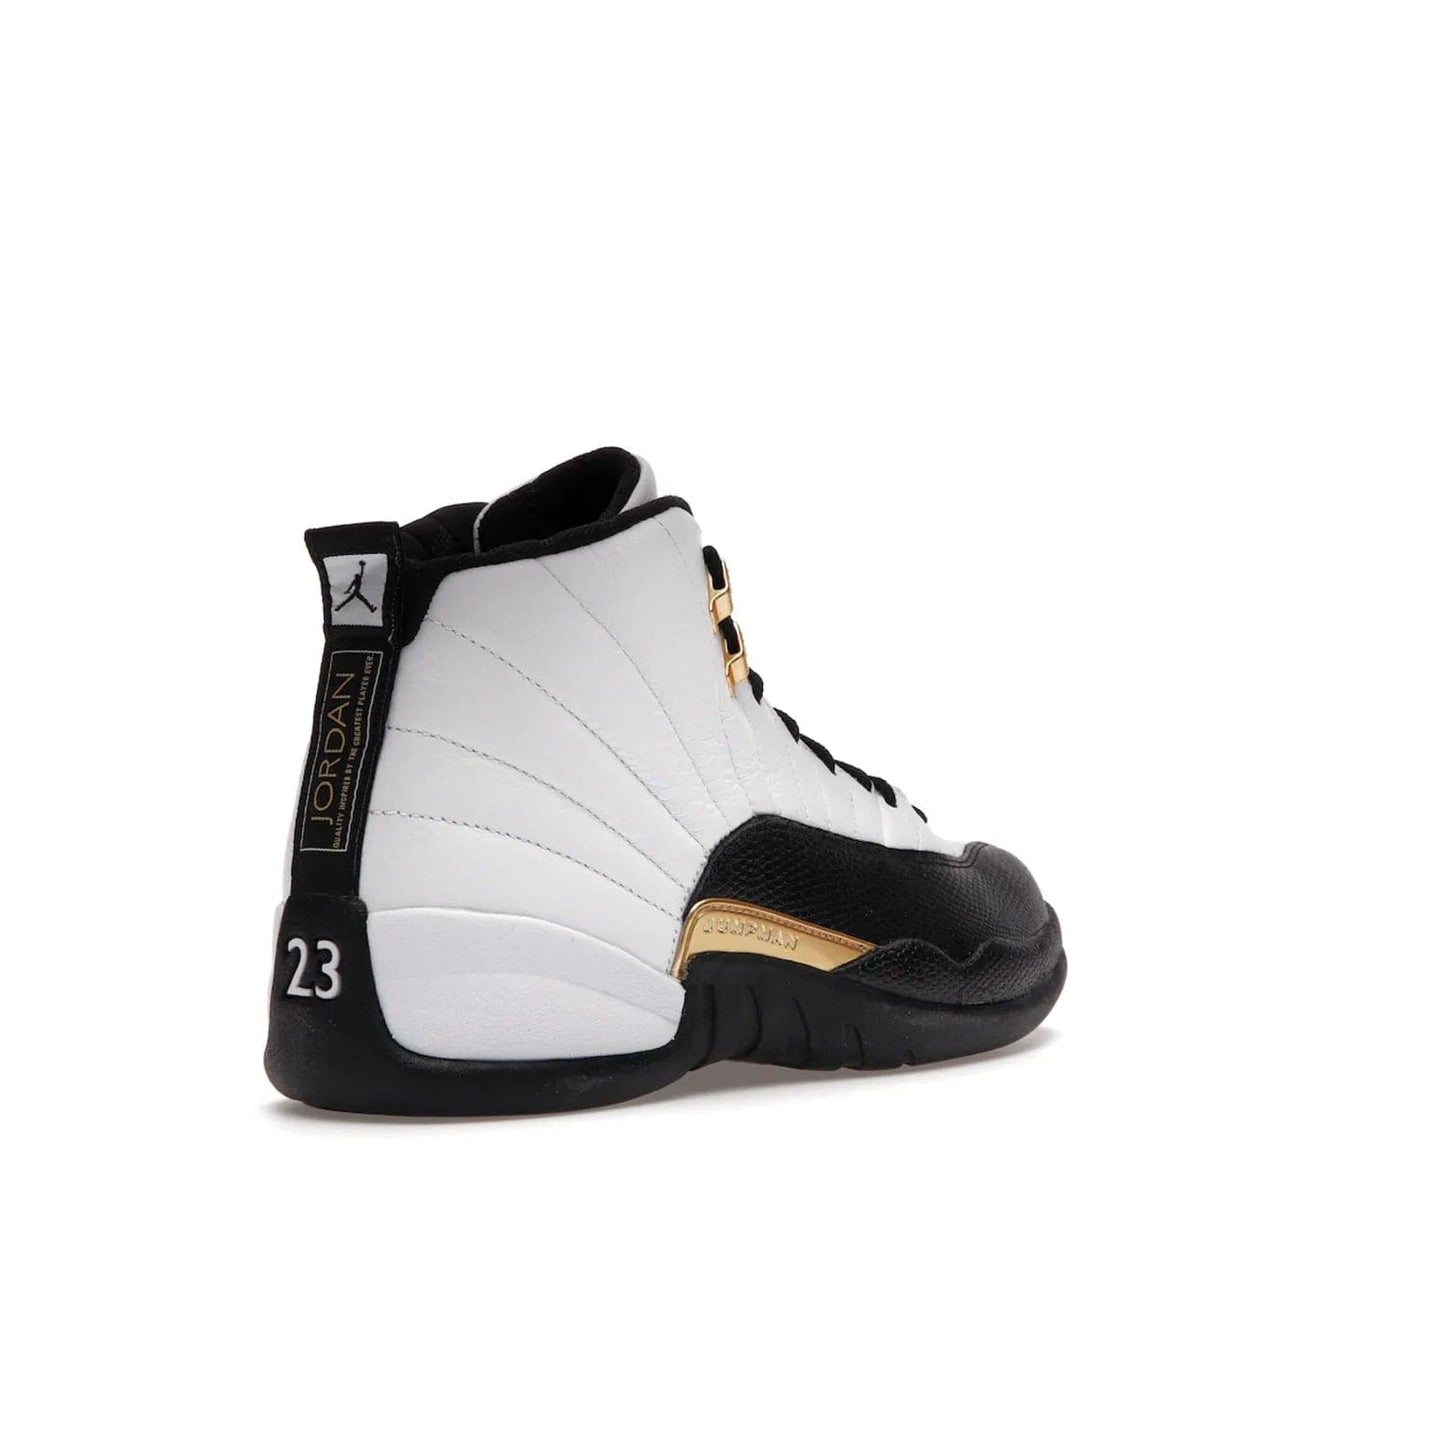 Jordan 12 Retro Royalty Taxi - Image 32 - Only at www.BallersClubKickz.com - Make a statement with the Air Jordan 12 Retro Royalty Taxi. Woven heel tag, gold plaquet, white tumbled leather upper plus a black toe wrap, make this modern take on the classic a must-have. Available in November 2021.